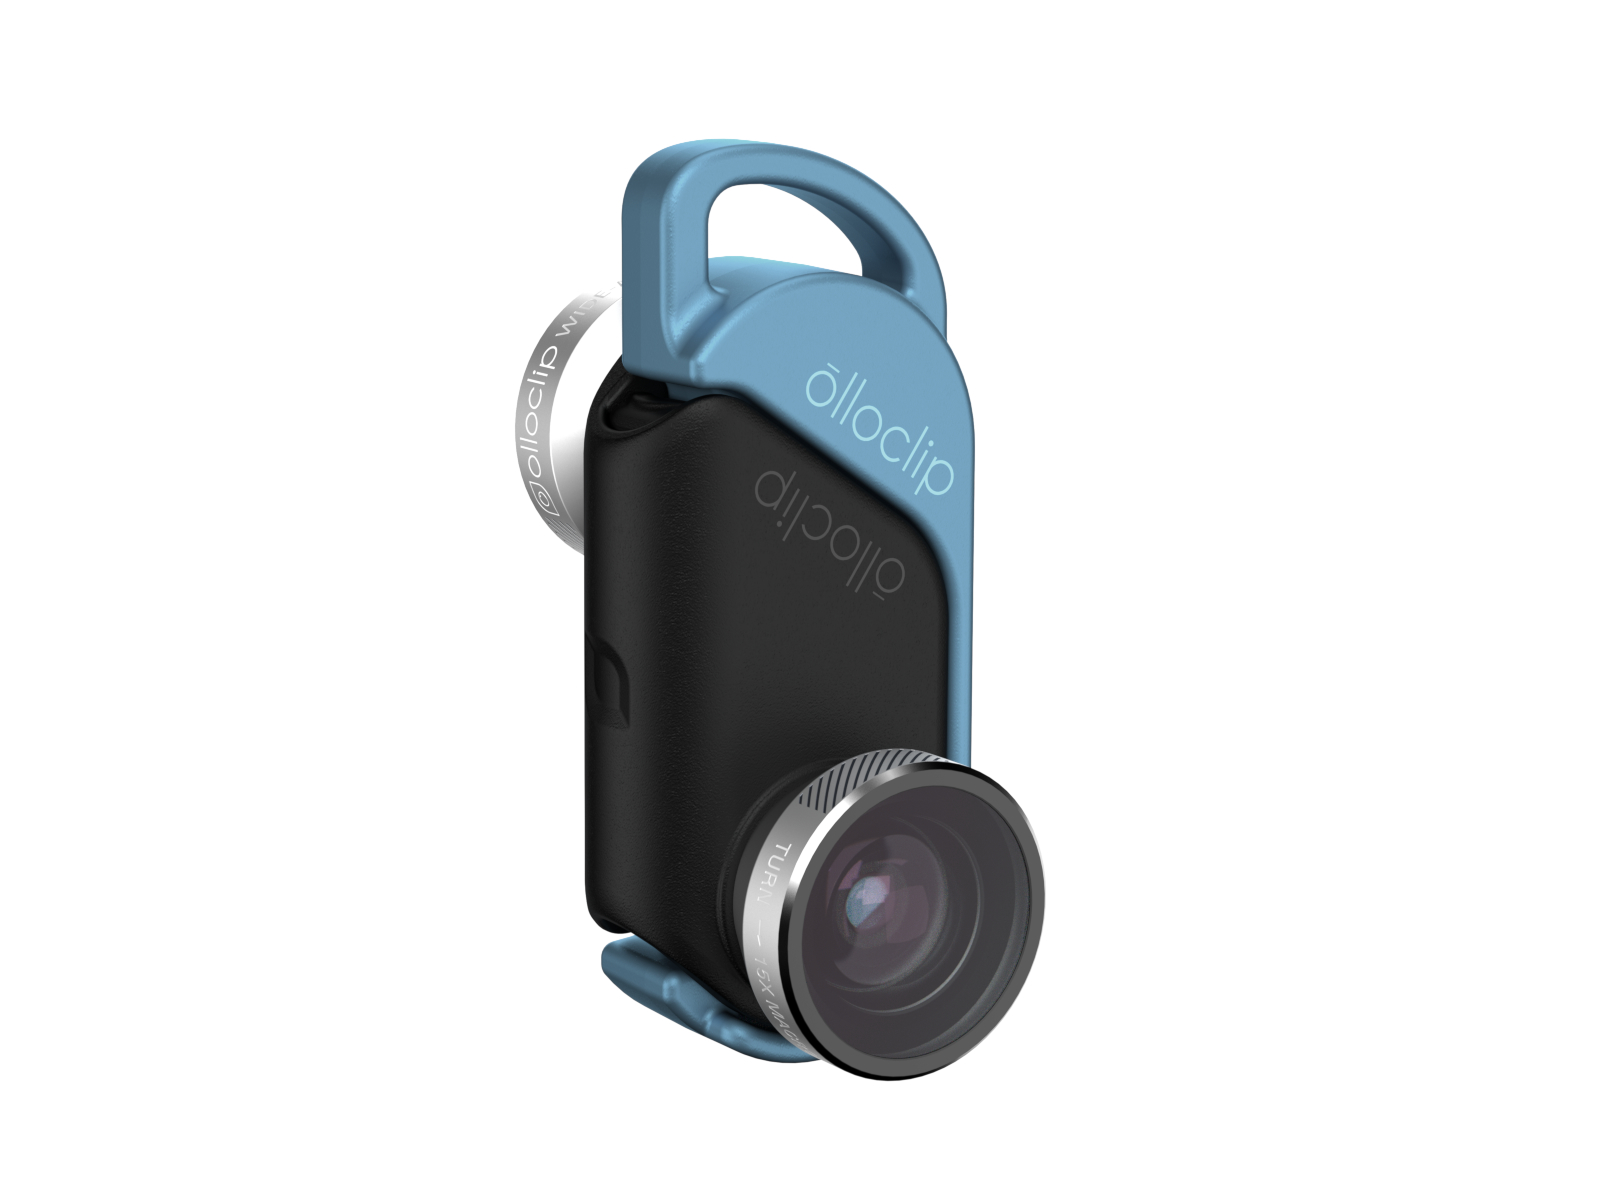 Olloclip 4 In 1 Iphone 6 6 Plus Lens Review Tom S Guide